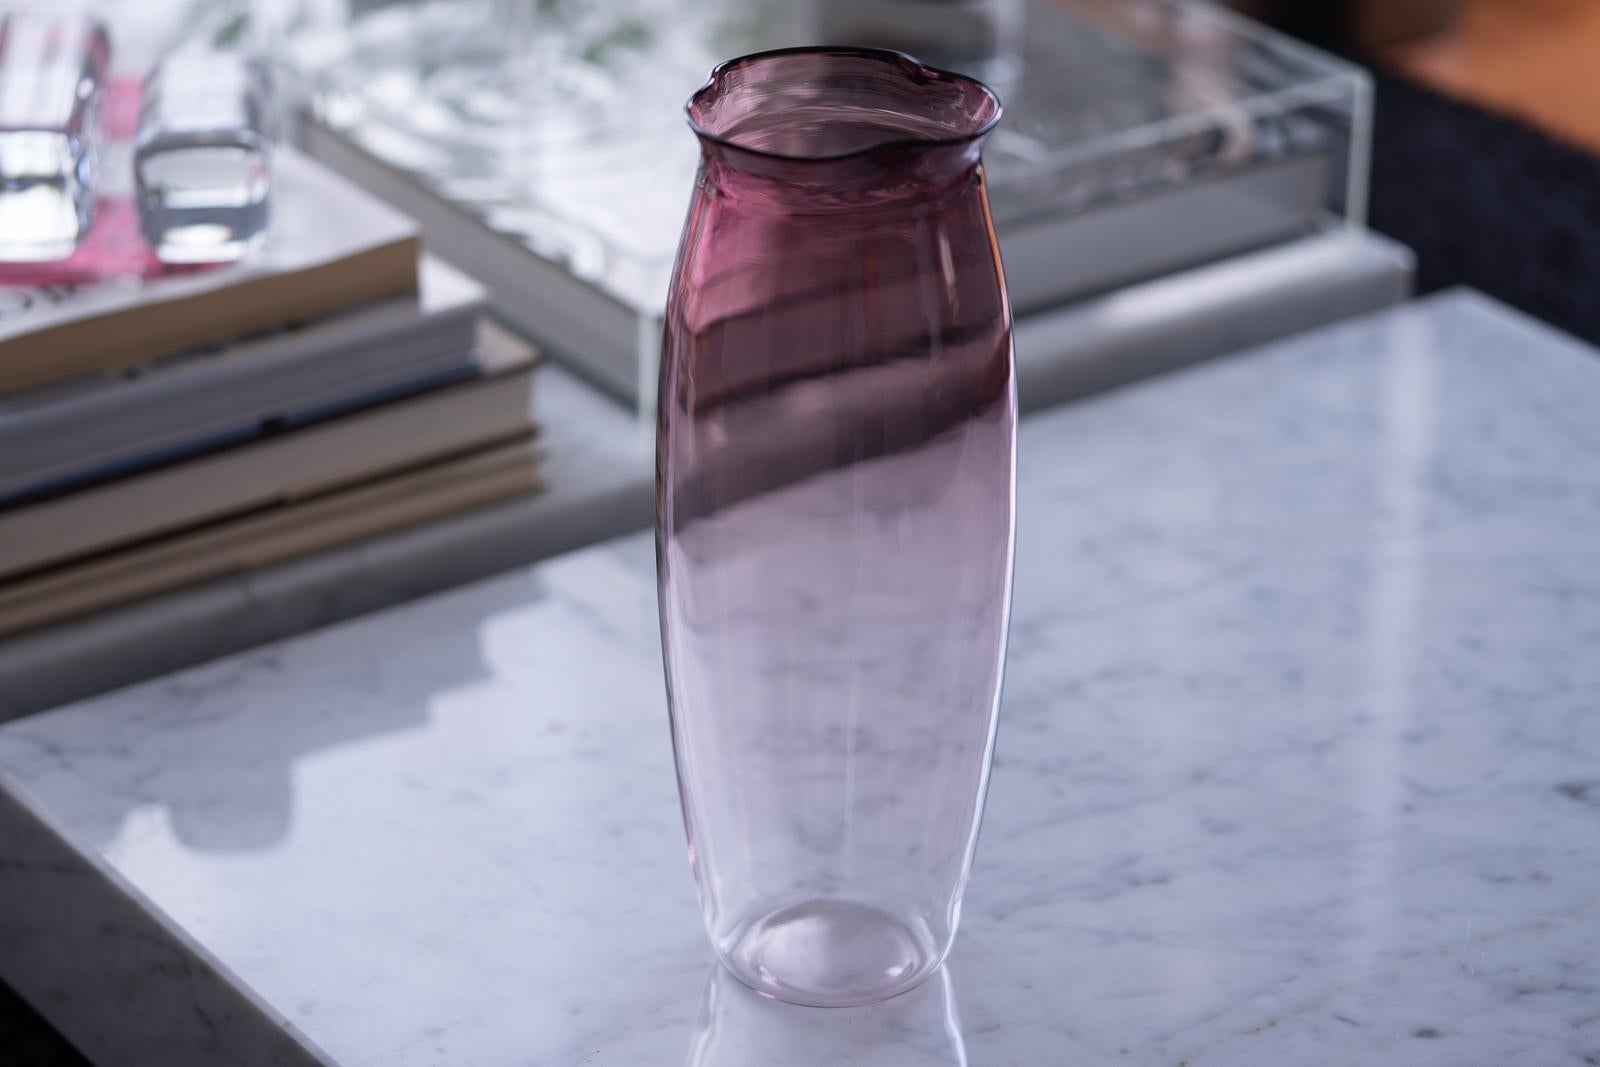 An elegant vase designed by Sergio Asti for Salviati in 2003. The thin blown glass walls gently curve and swell upward, transitioning from clear to violet at the top. Three pinched and rounded corners recall the form of the tulip flower from which